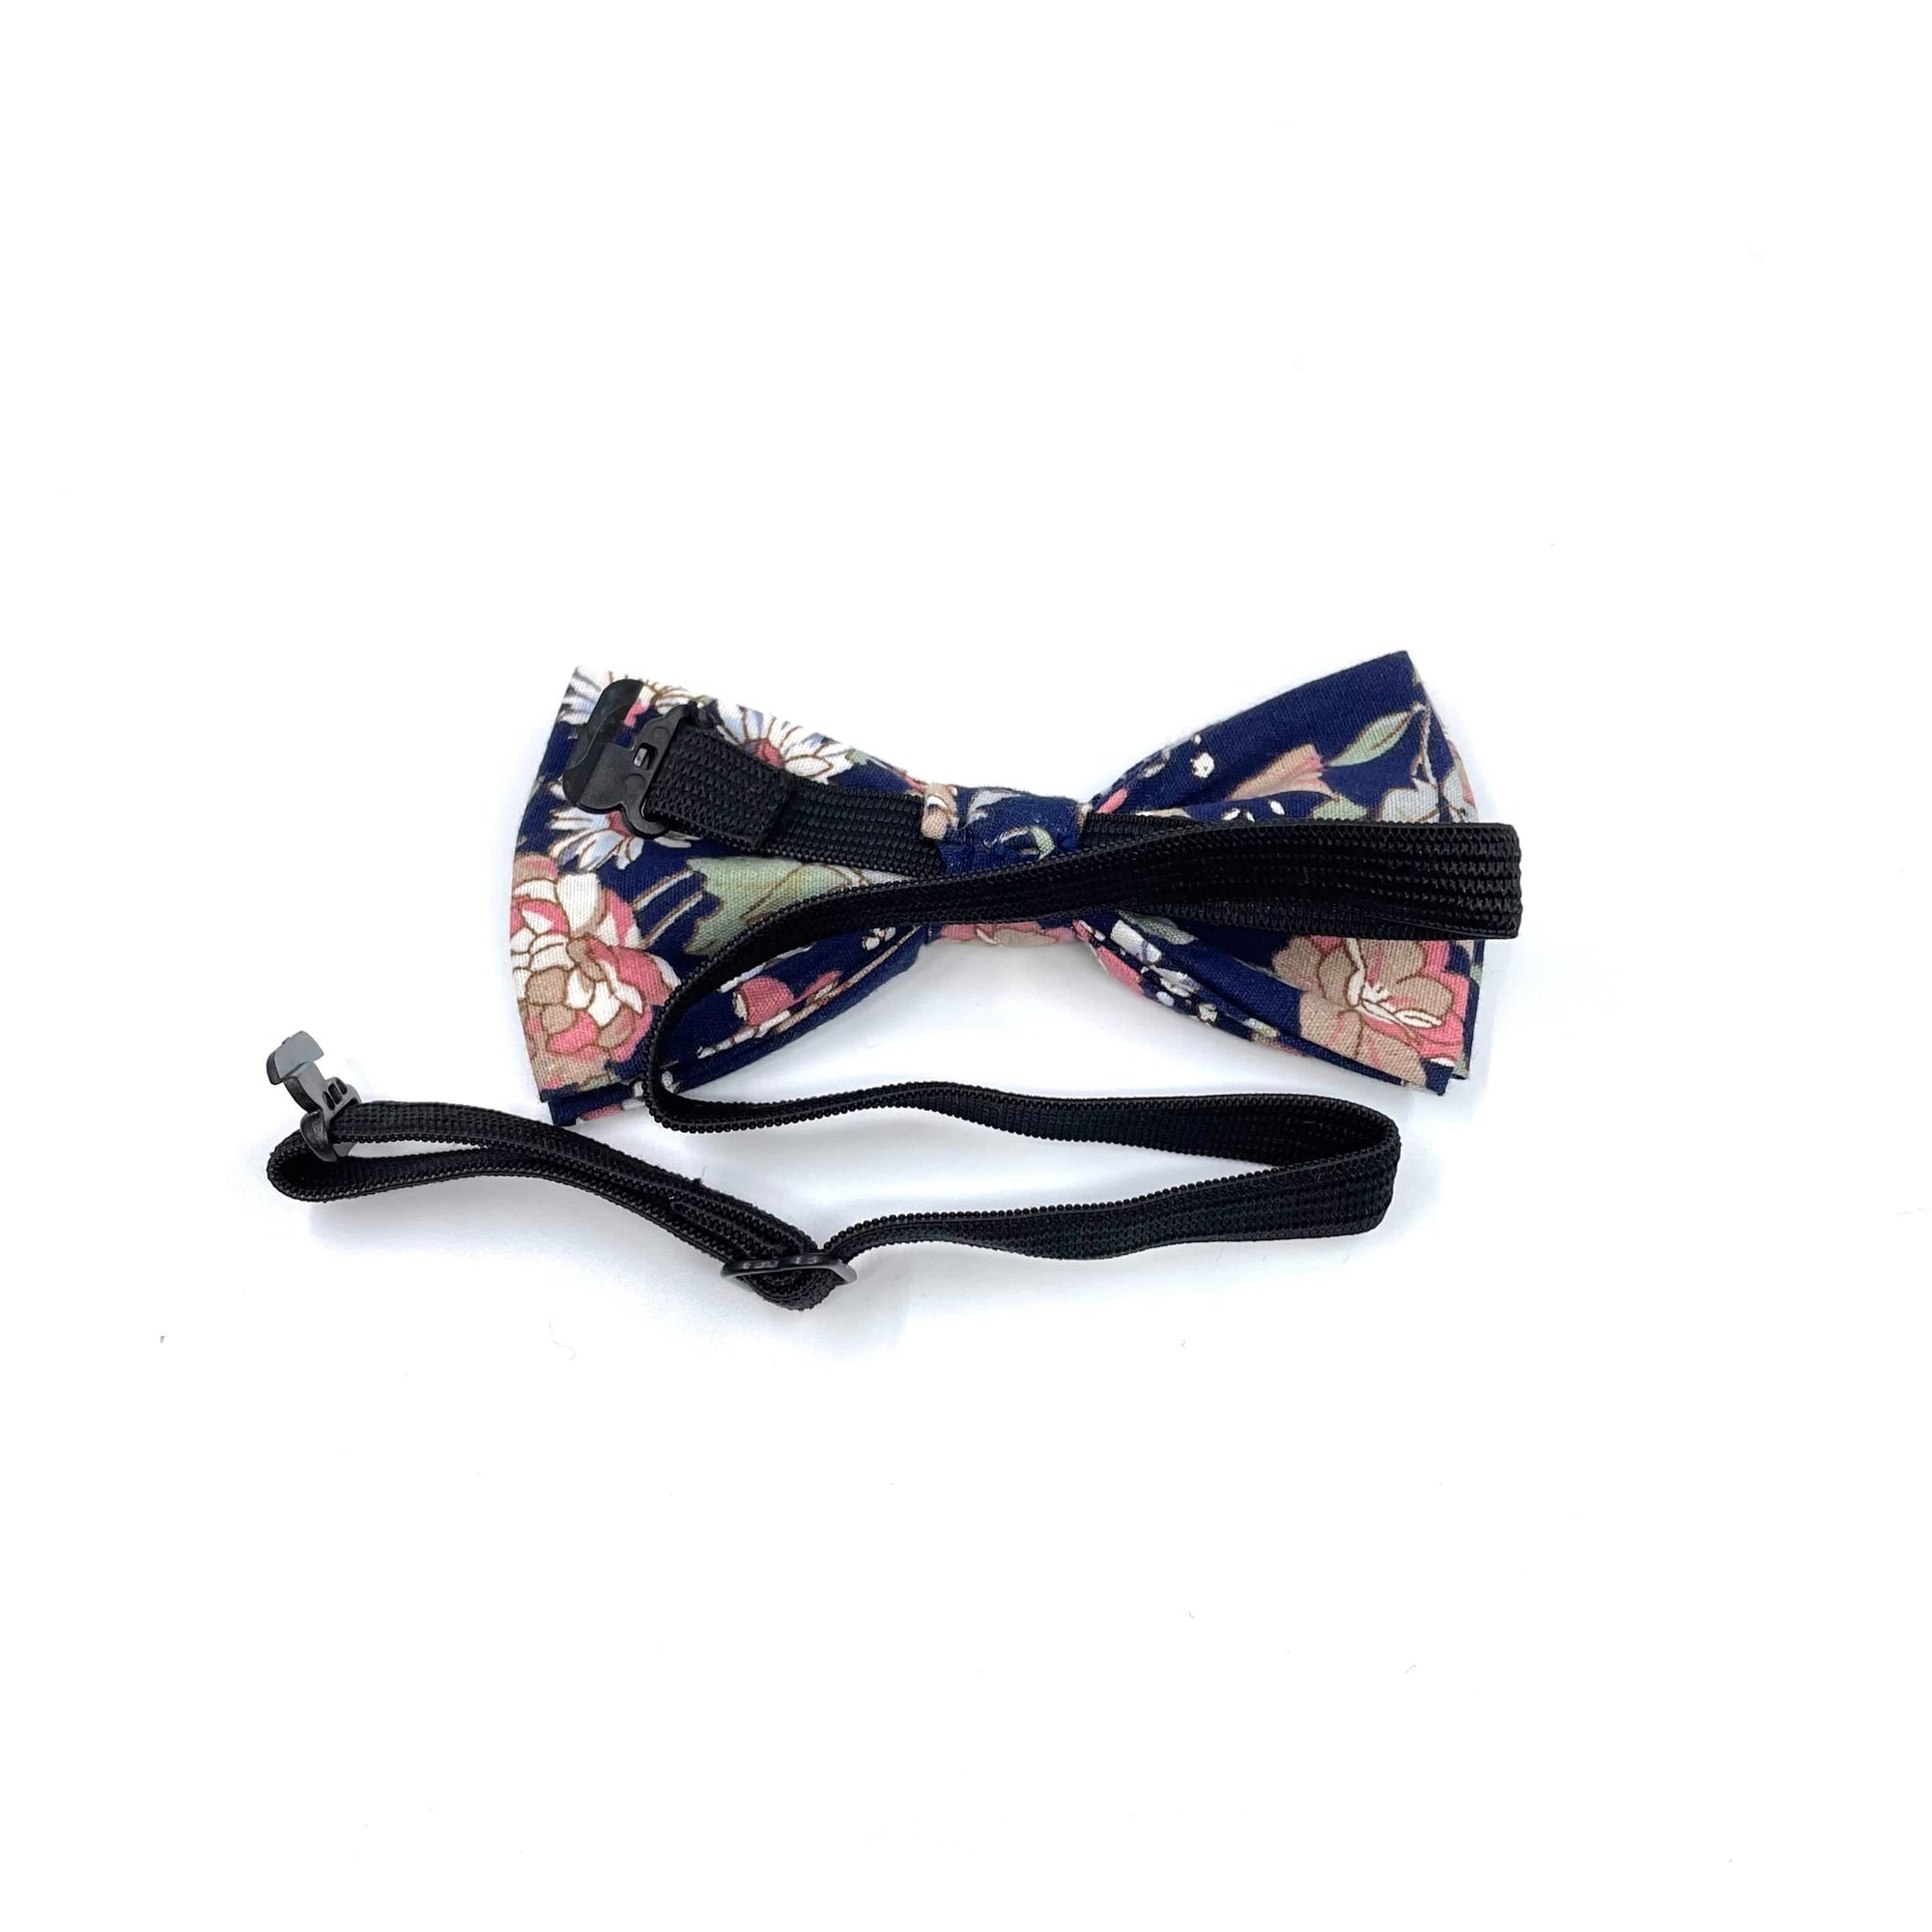 Kids Blue Floral Bow Tie and Children with Pink Flowers ASPEN-Kids Blue Floral Bow Tie - Aspen Floral Kid&#39;s bow tie Strap is adjustablePre-Tied bowtieBow Tie 10.5 * 6CMFor toddlers ages 0- Great for Prom Dinners Interviews Photo shoots Photo sessions Dates Wedding Attendant Ring Bearers Aspen Floral Bow tie . Fits toddlers and babies. Aspen ow tie toddler floral for wedding and events groom groomsmen flower bow tie mytieshop ring bearer page boy bow tie white bow tie white and blue tie kids bowt